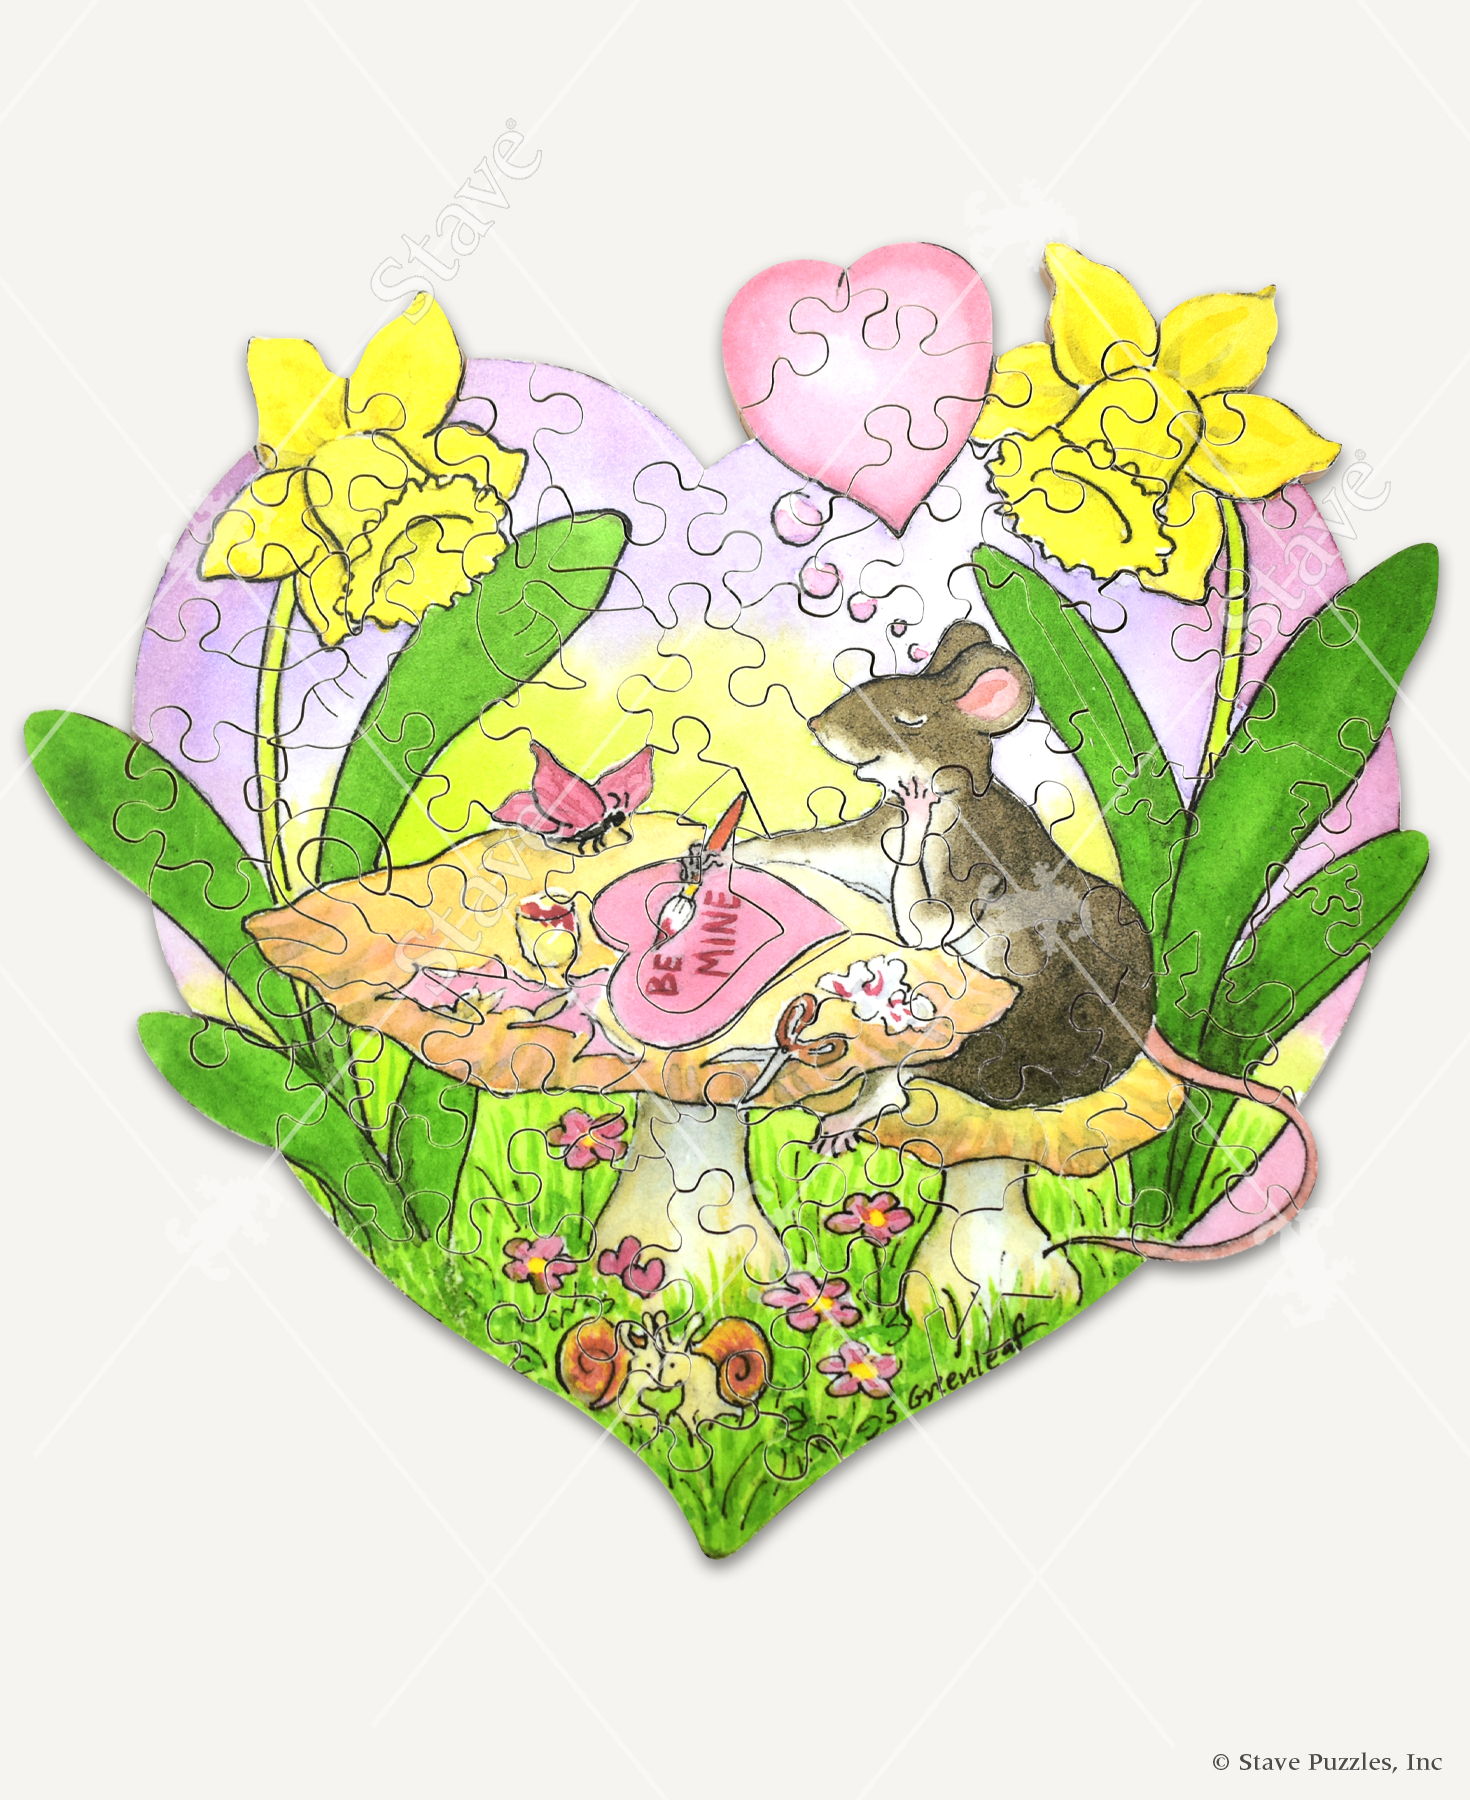 Hearts And Crafts wooden jigsaw puzzle features a mouse sitting at a mushroom table, who is joined by a butterfly as it crafts a heart shaped valentine's day card and paints the words "be mine". The mouse is thinking about love, which is depicted with a pink heart shaped thought bubble above the mouse's head. This scene is enclosed inside a giant heart shape and framed with a daffodils on each side of the image. Towards the bottom on the heart, two snails sit in the grass and embrace each other as their tails form a heart.